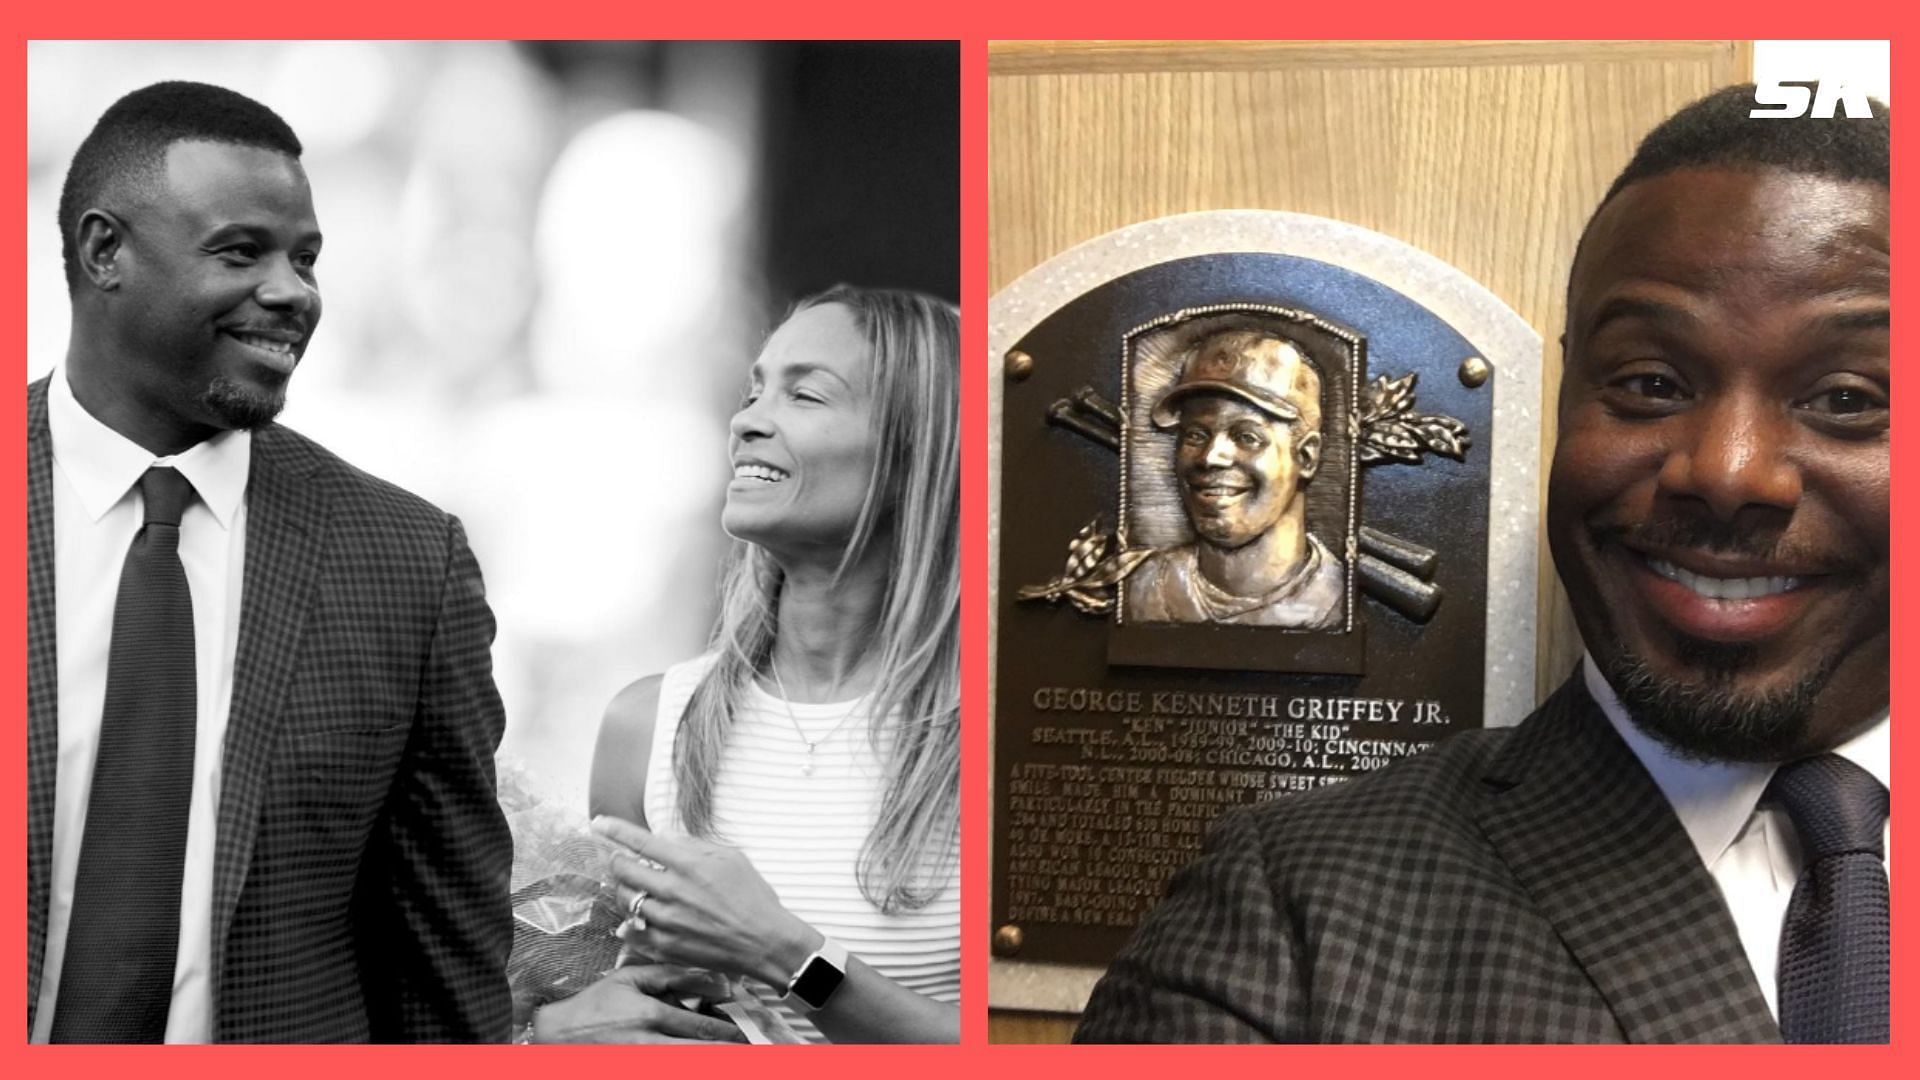 Seattle sports legend Ken Griffey Jr. and wife, Melissa, become latest  members of Sounders Family